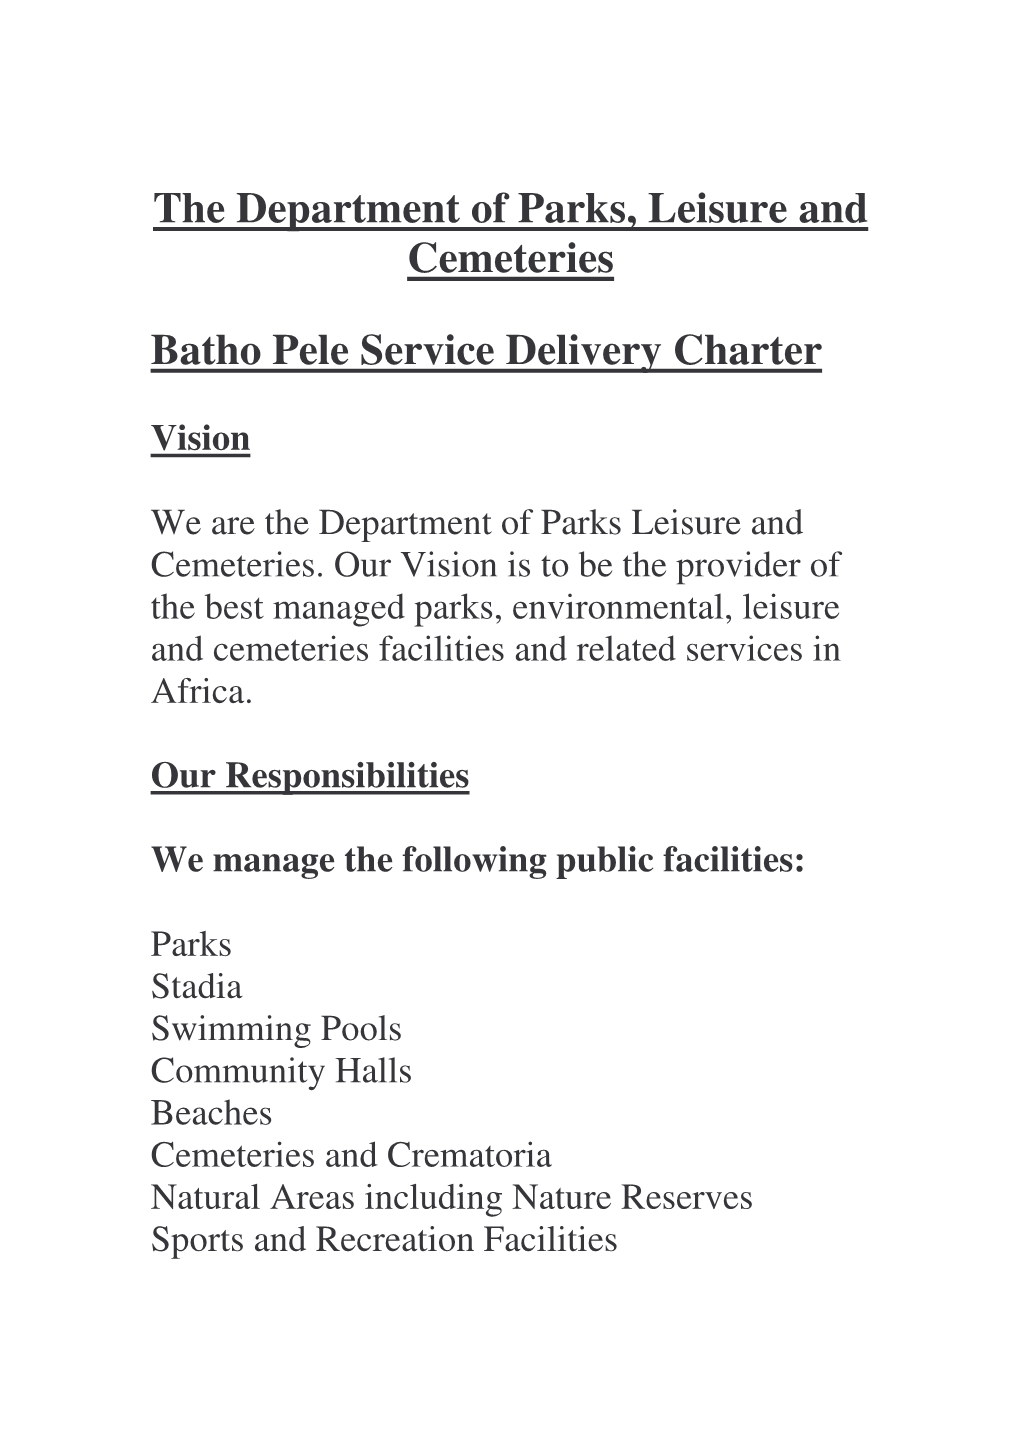 Service Delivery Charter